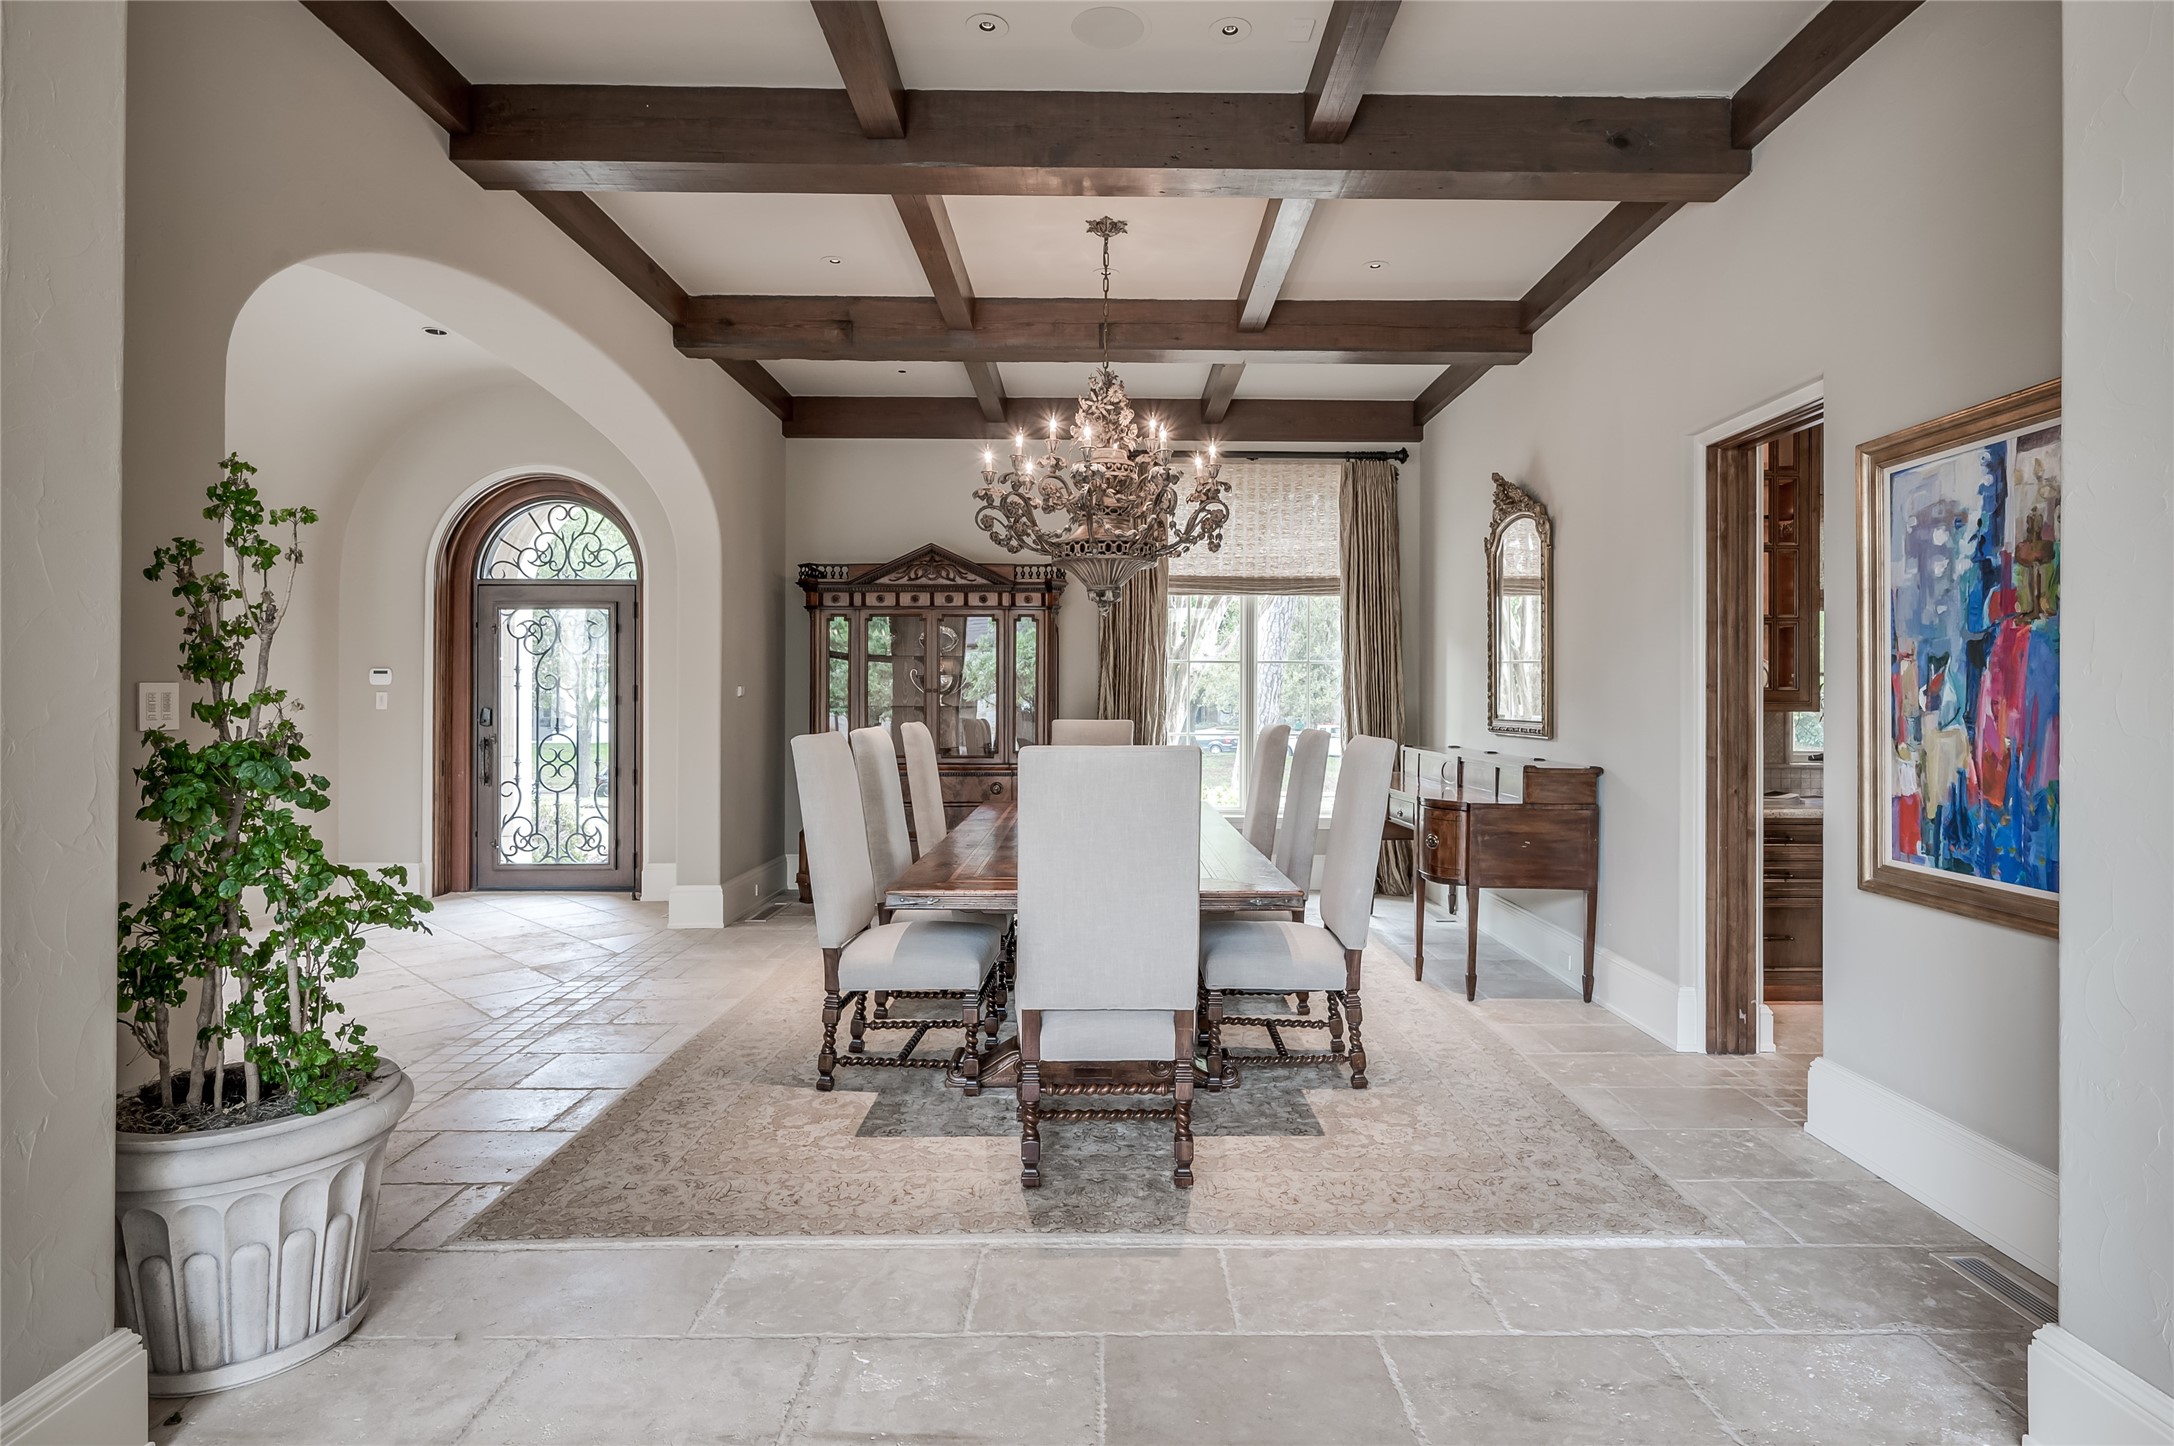 [Dining Room - 21x15]
The dining room has a coffered ceiling and shares the living room’s front views. Note alder wood pocket doors in closed position. Opening at right reveals the butler's pantry